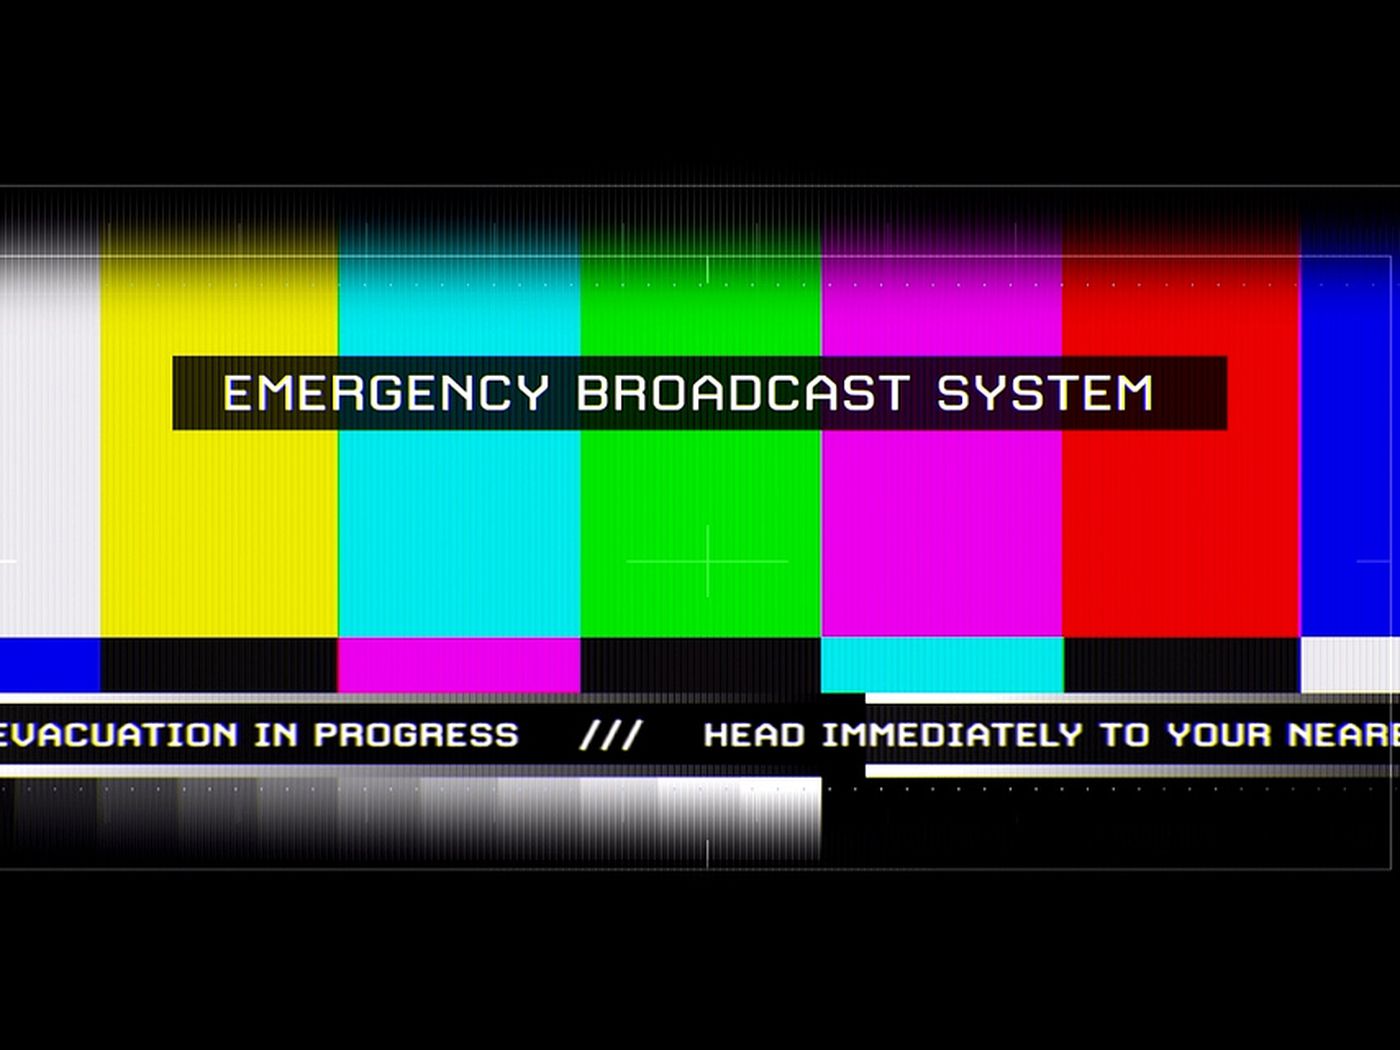 Some Emergency Alert System decoders vulnerable to hacking